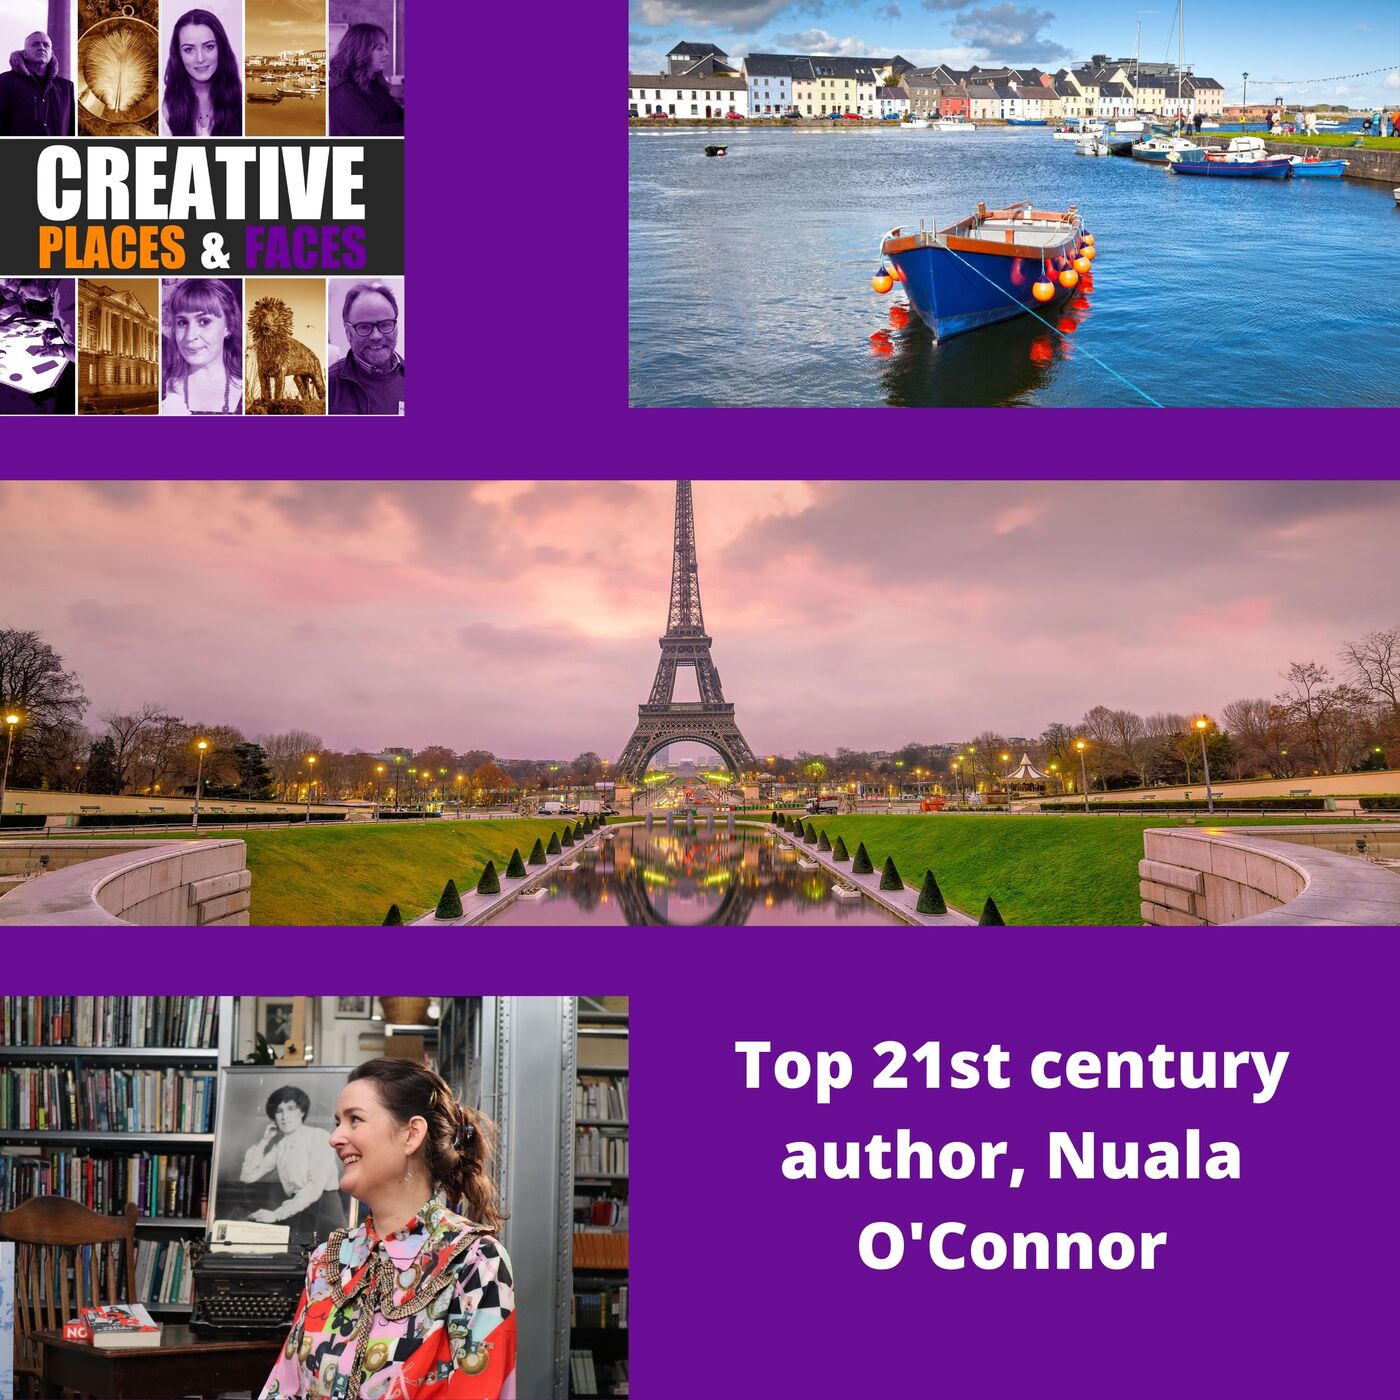 Top 21st Century Author, Nuala O'Connor, From Dublin To Galway To Paris And More